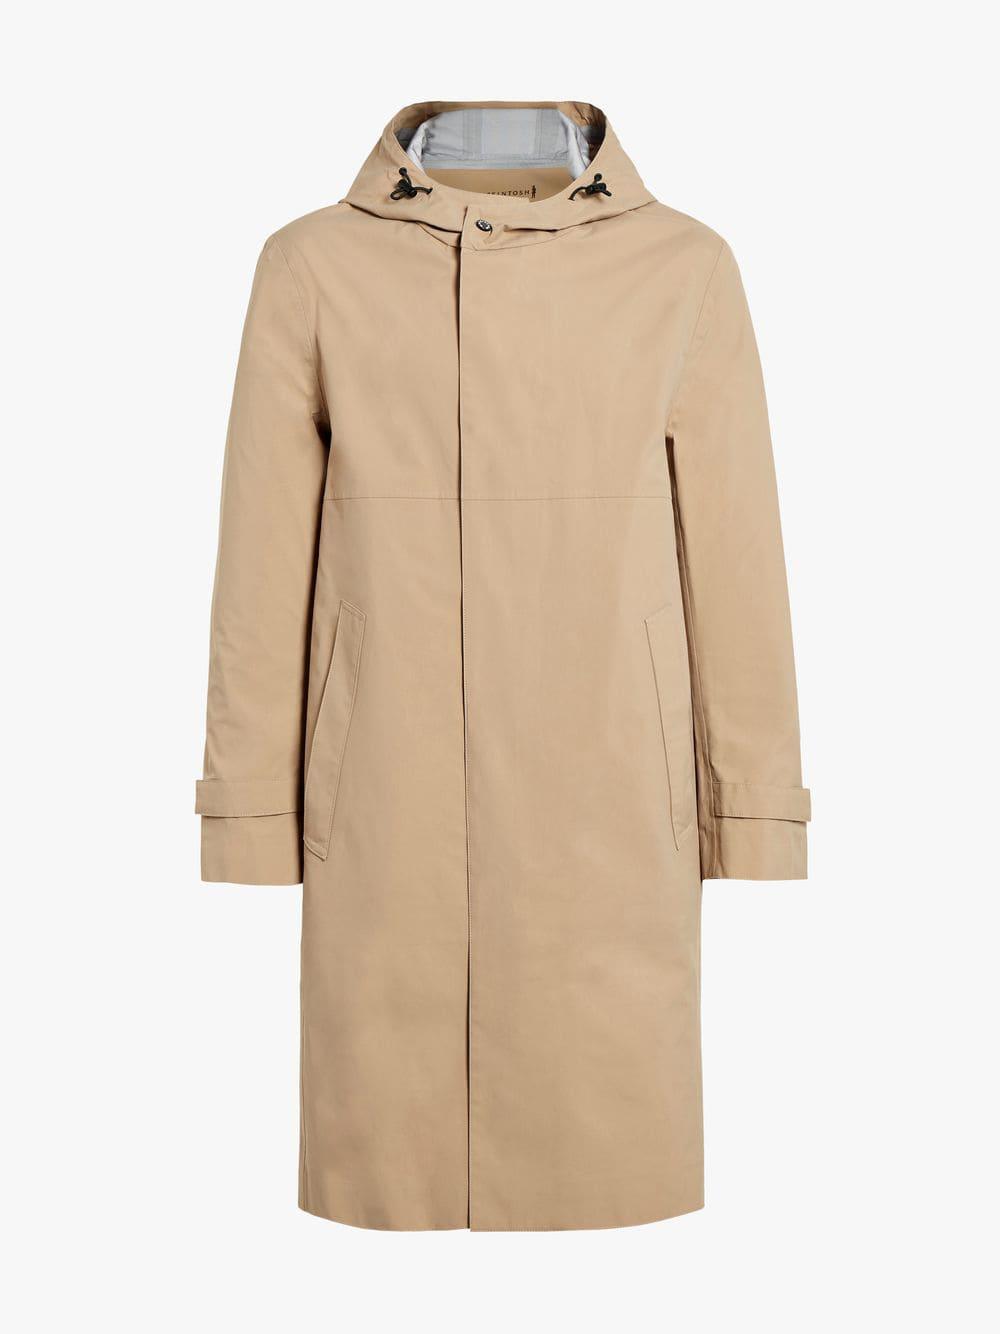 Mackintosh Synthetic Fawn Nylon Hooded Coat in Natural for Men - Lyst